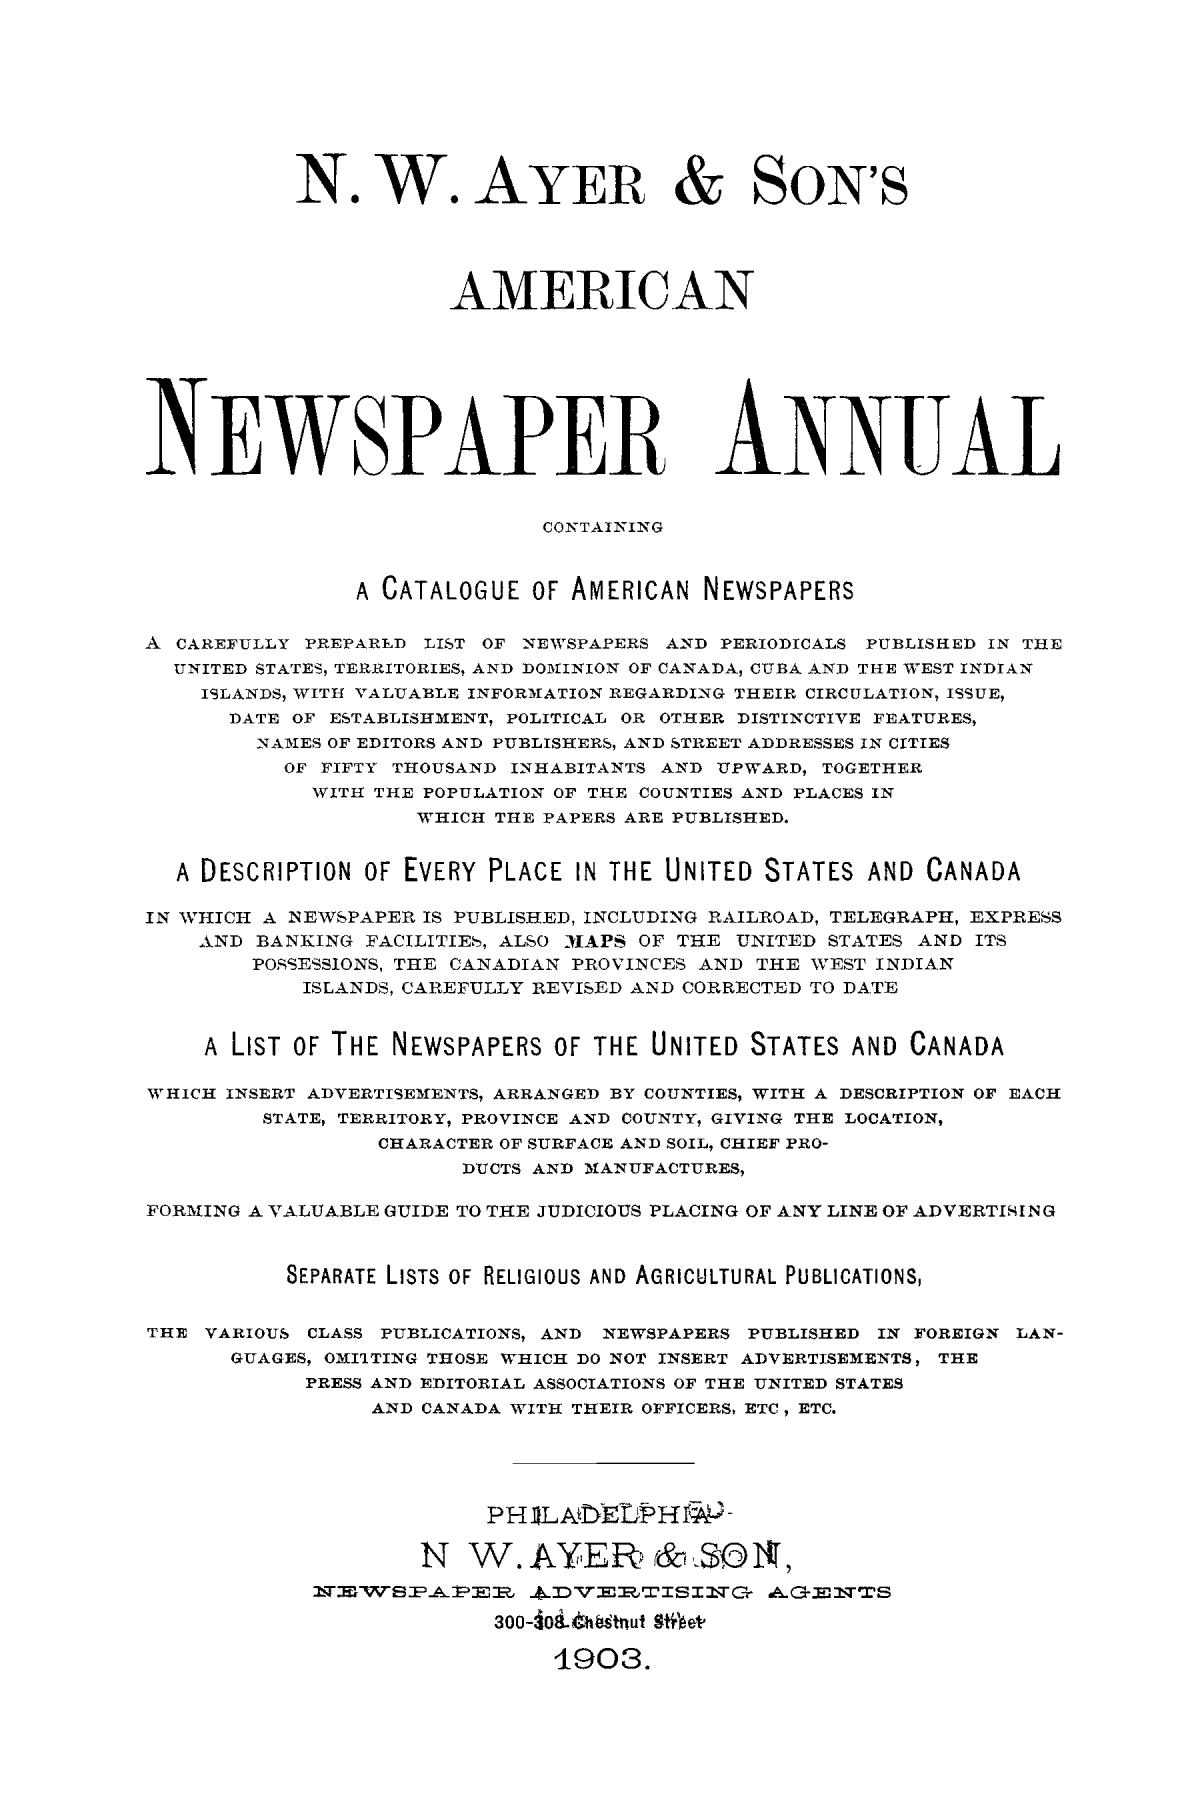 N. W. Ayer & Son's American Newspaper Annual: containing a Catalogue of American Newspapers, a List of All Newspapers of the United States and Canada, 1903, Volume 2
                                                
                                                    Title Page
                                                